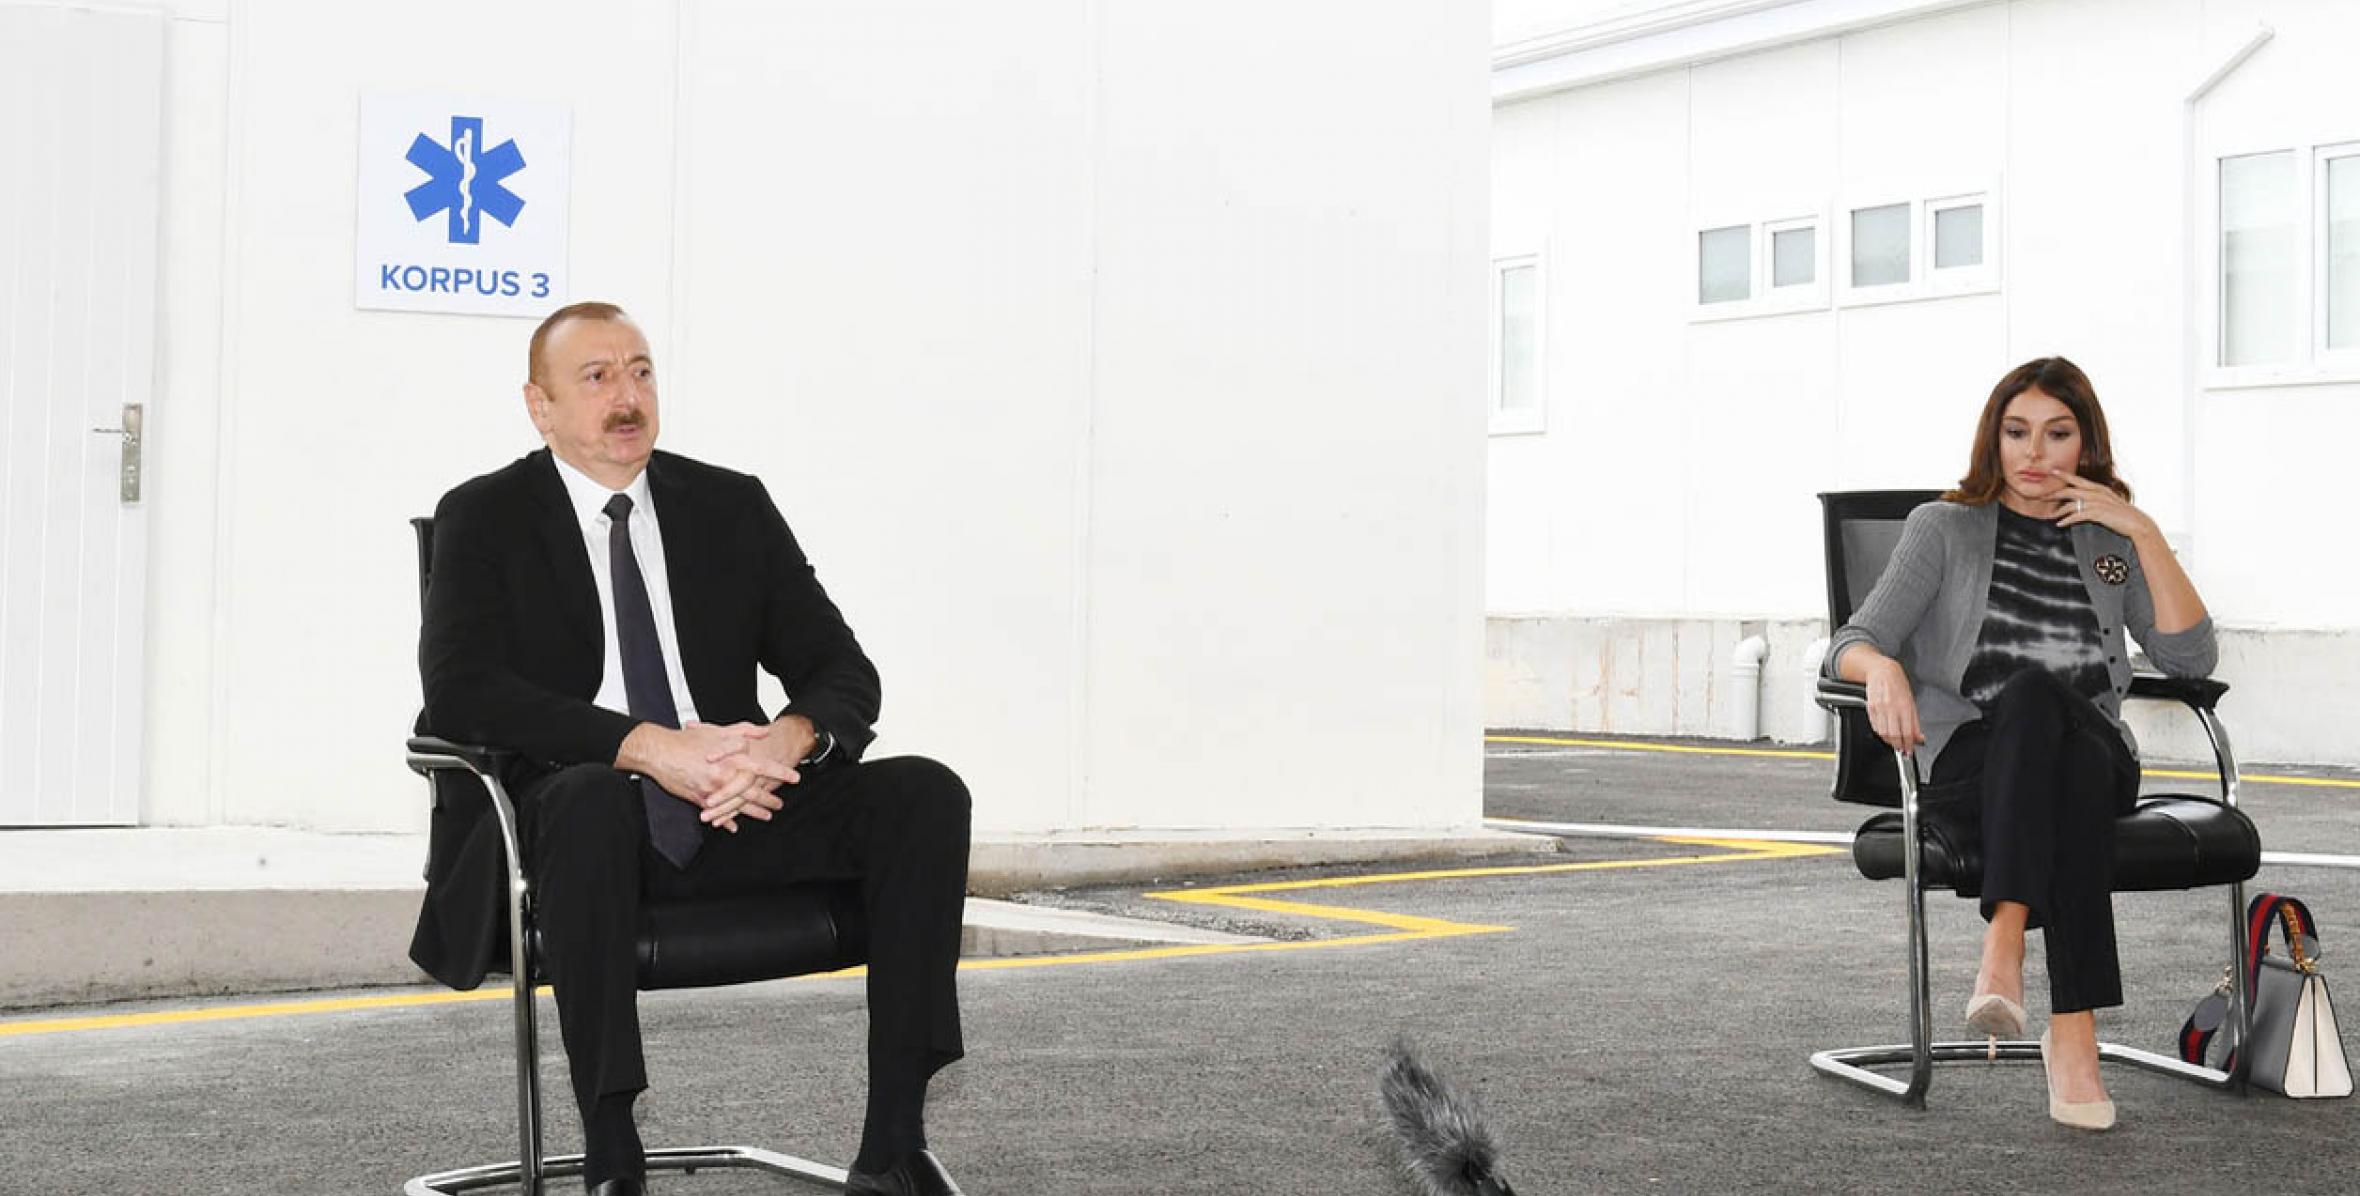 Speech by Ilham Aliyev at the opening of the first modular hospital complex